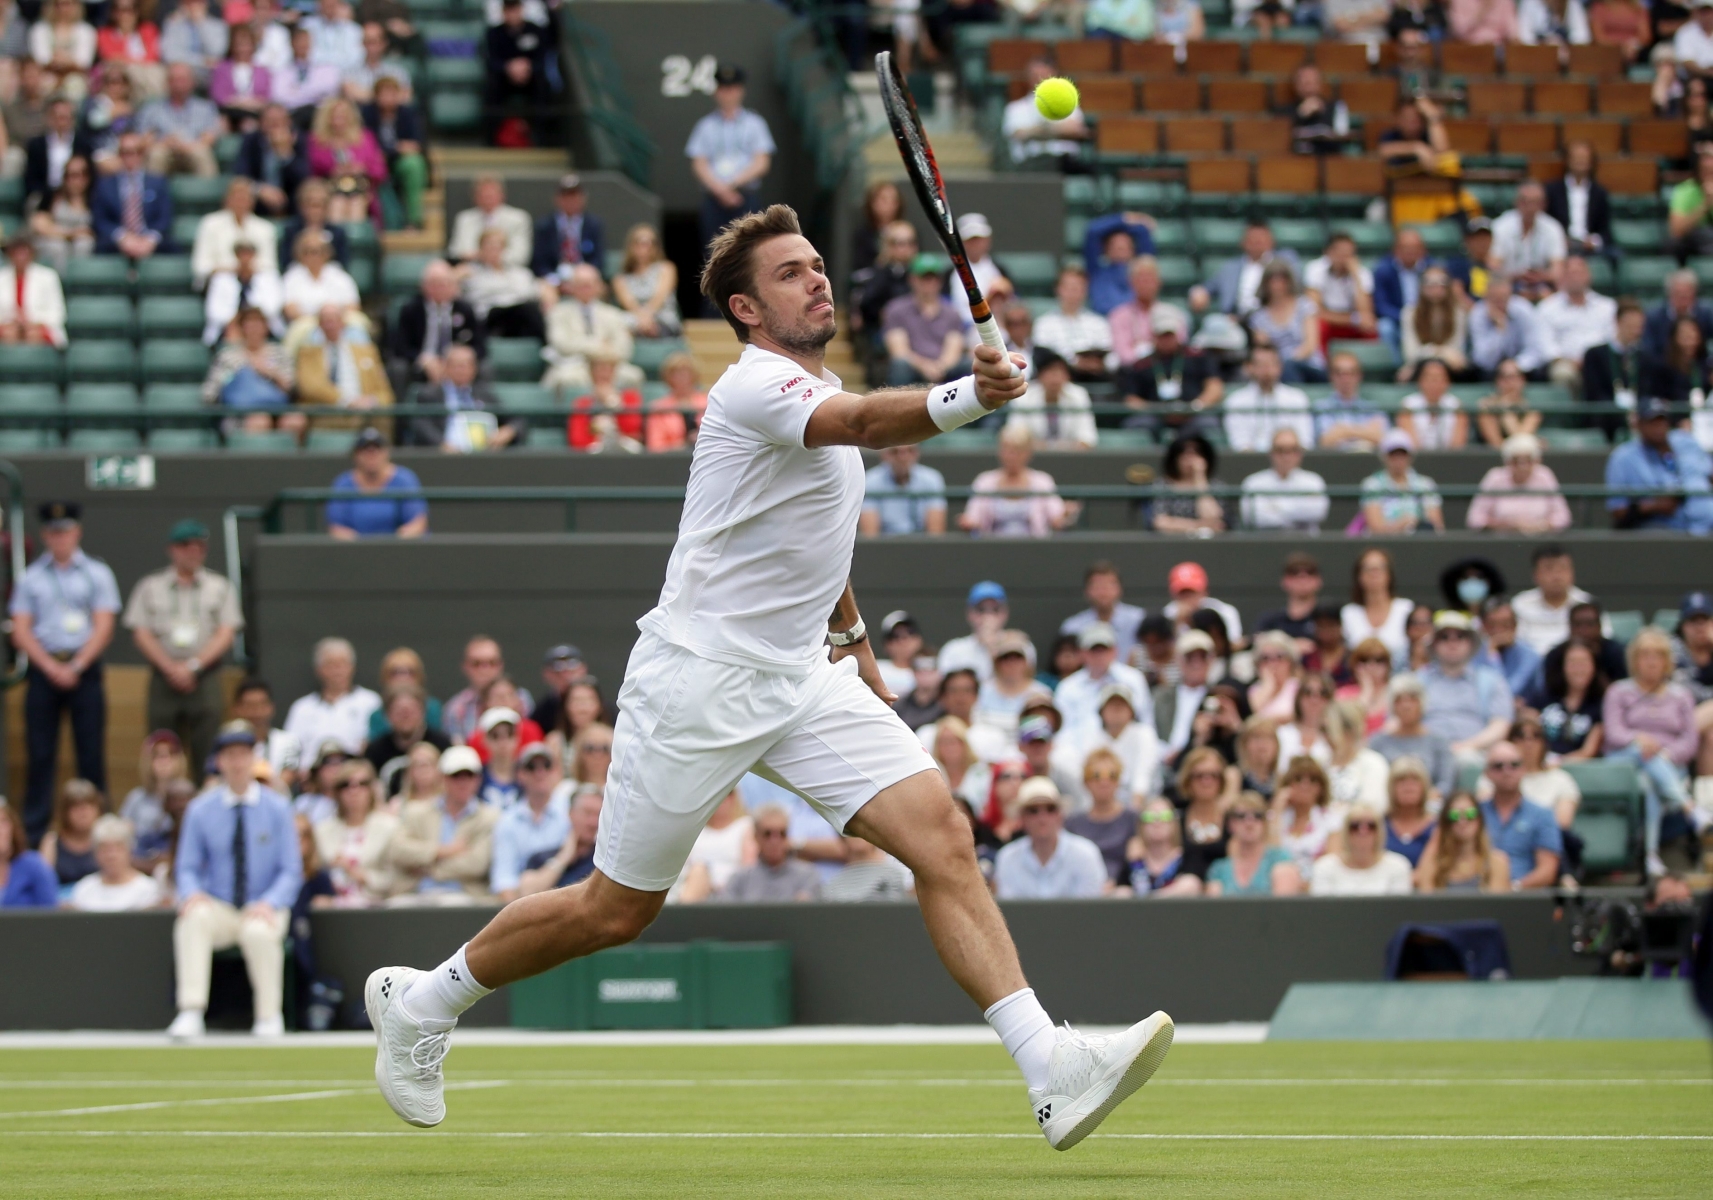 Stan Wawrinka of Switzerland plays a return to Taylor Fritz of the U.S during their men's singles match on day two of the Wimbledon Tennis Championships in London, Tuesday, June 28, 2016. (AP Photo/Tim Ireland) Britain Wimbledon Tennis